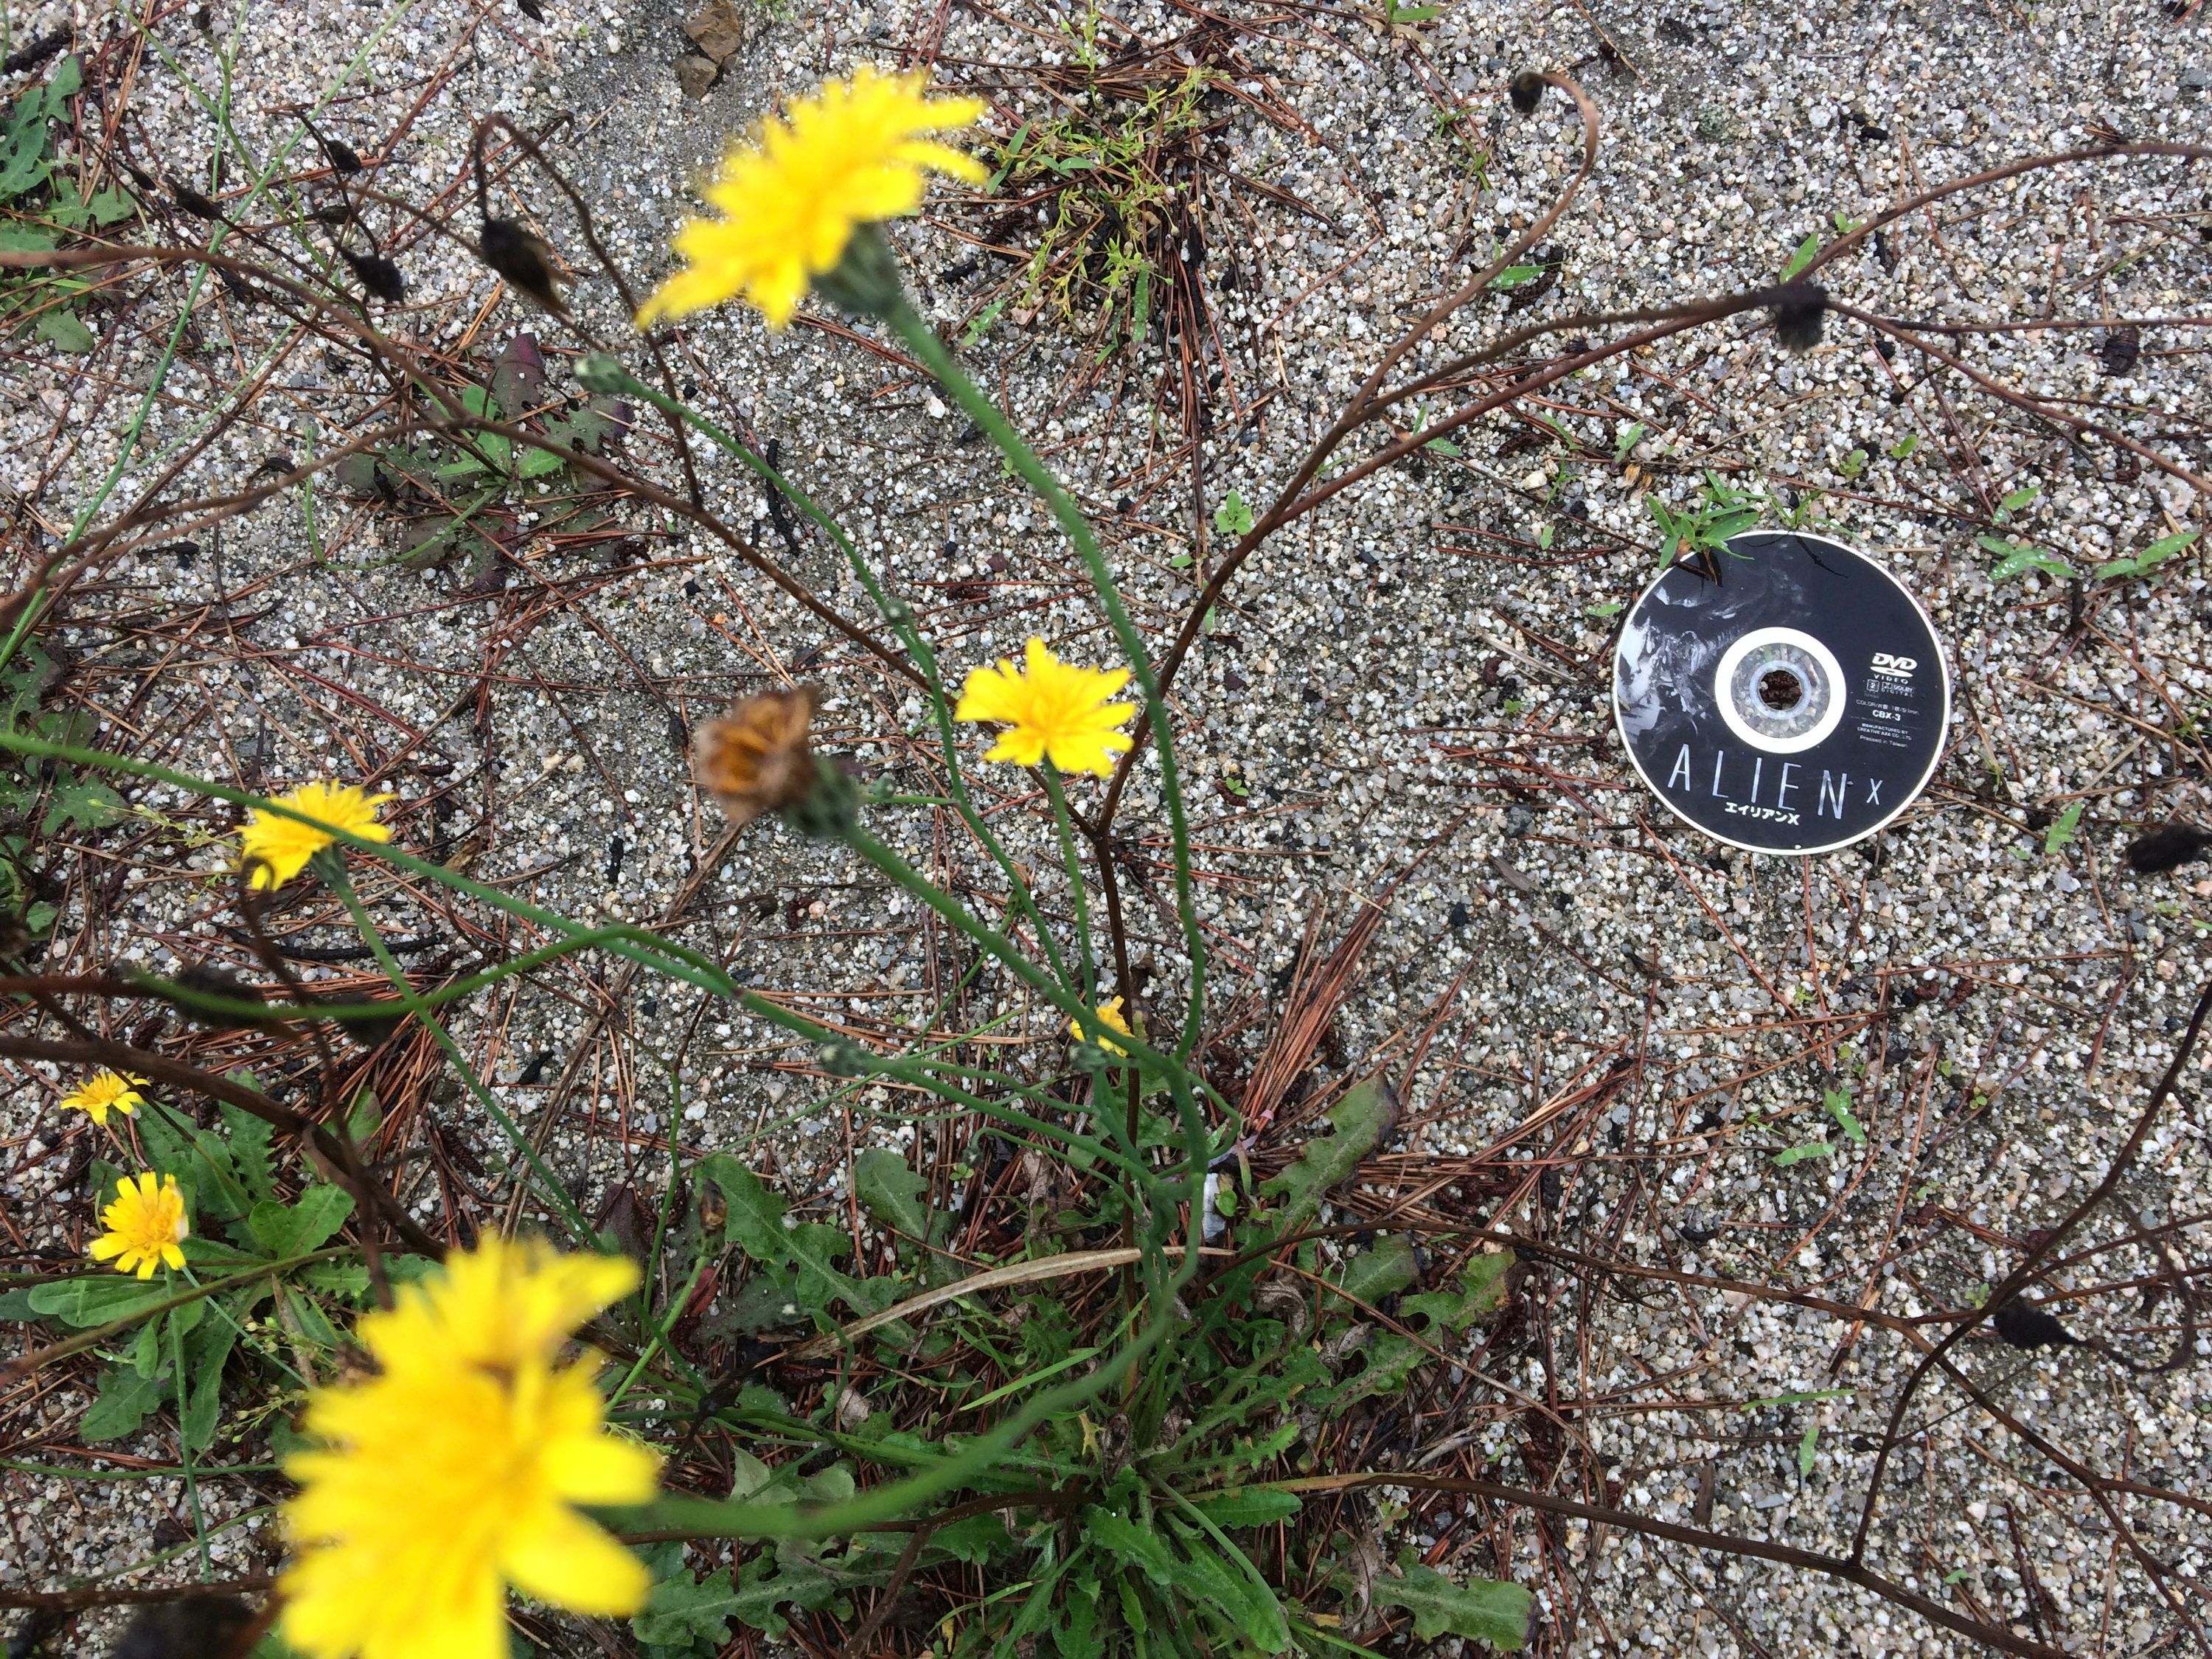 Yellow flowers and an abandoned DVD titled “Alien X” on the beach.